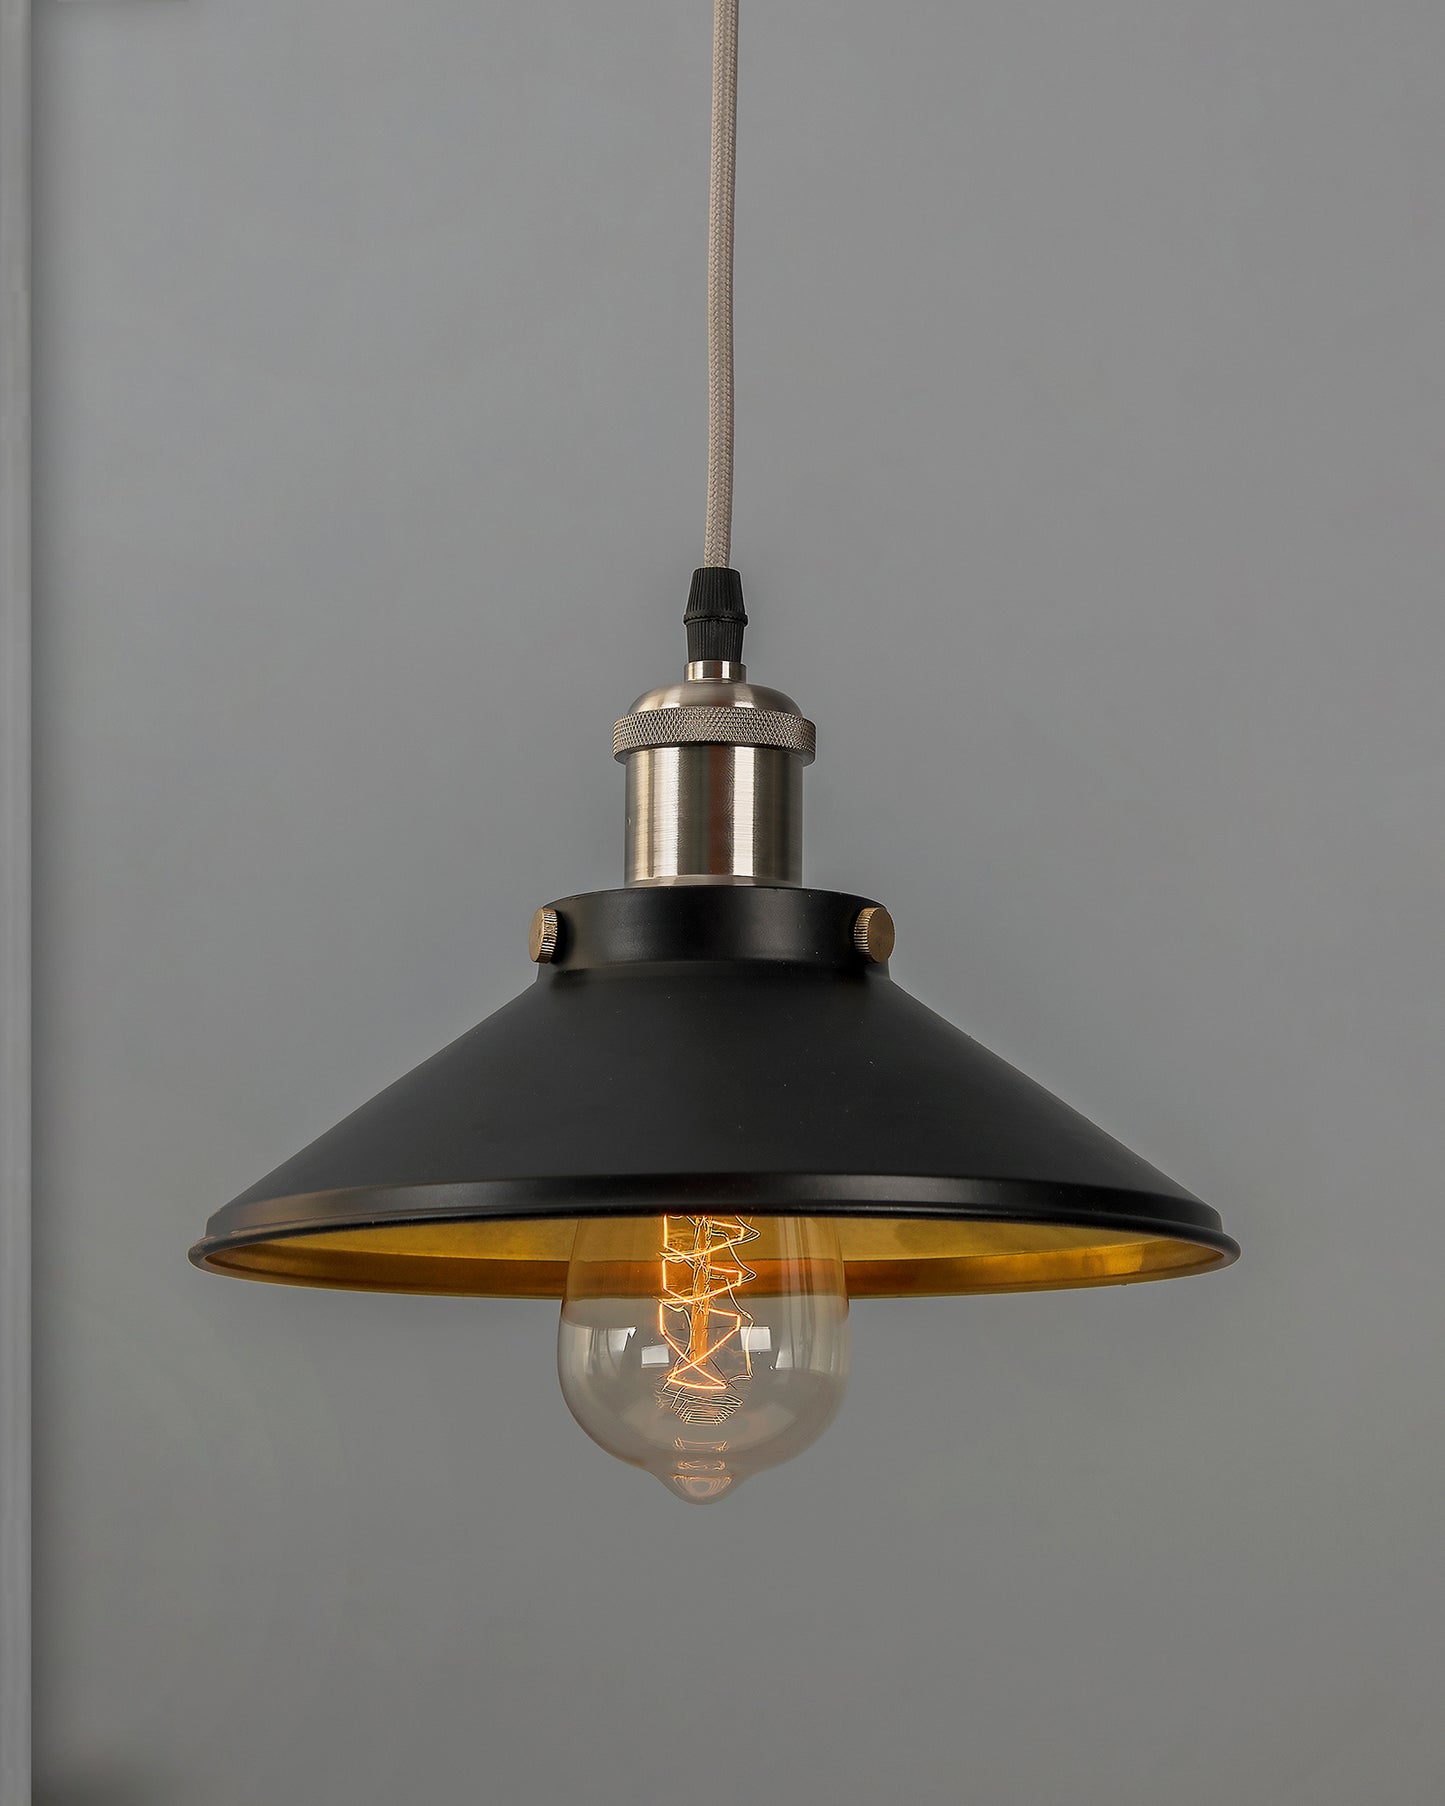 Single Black Cone Pendant with Nickel Holder, E27, Modern Nordic Hanging Ceiling Light